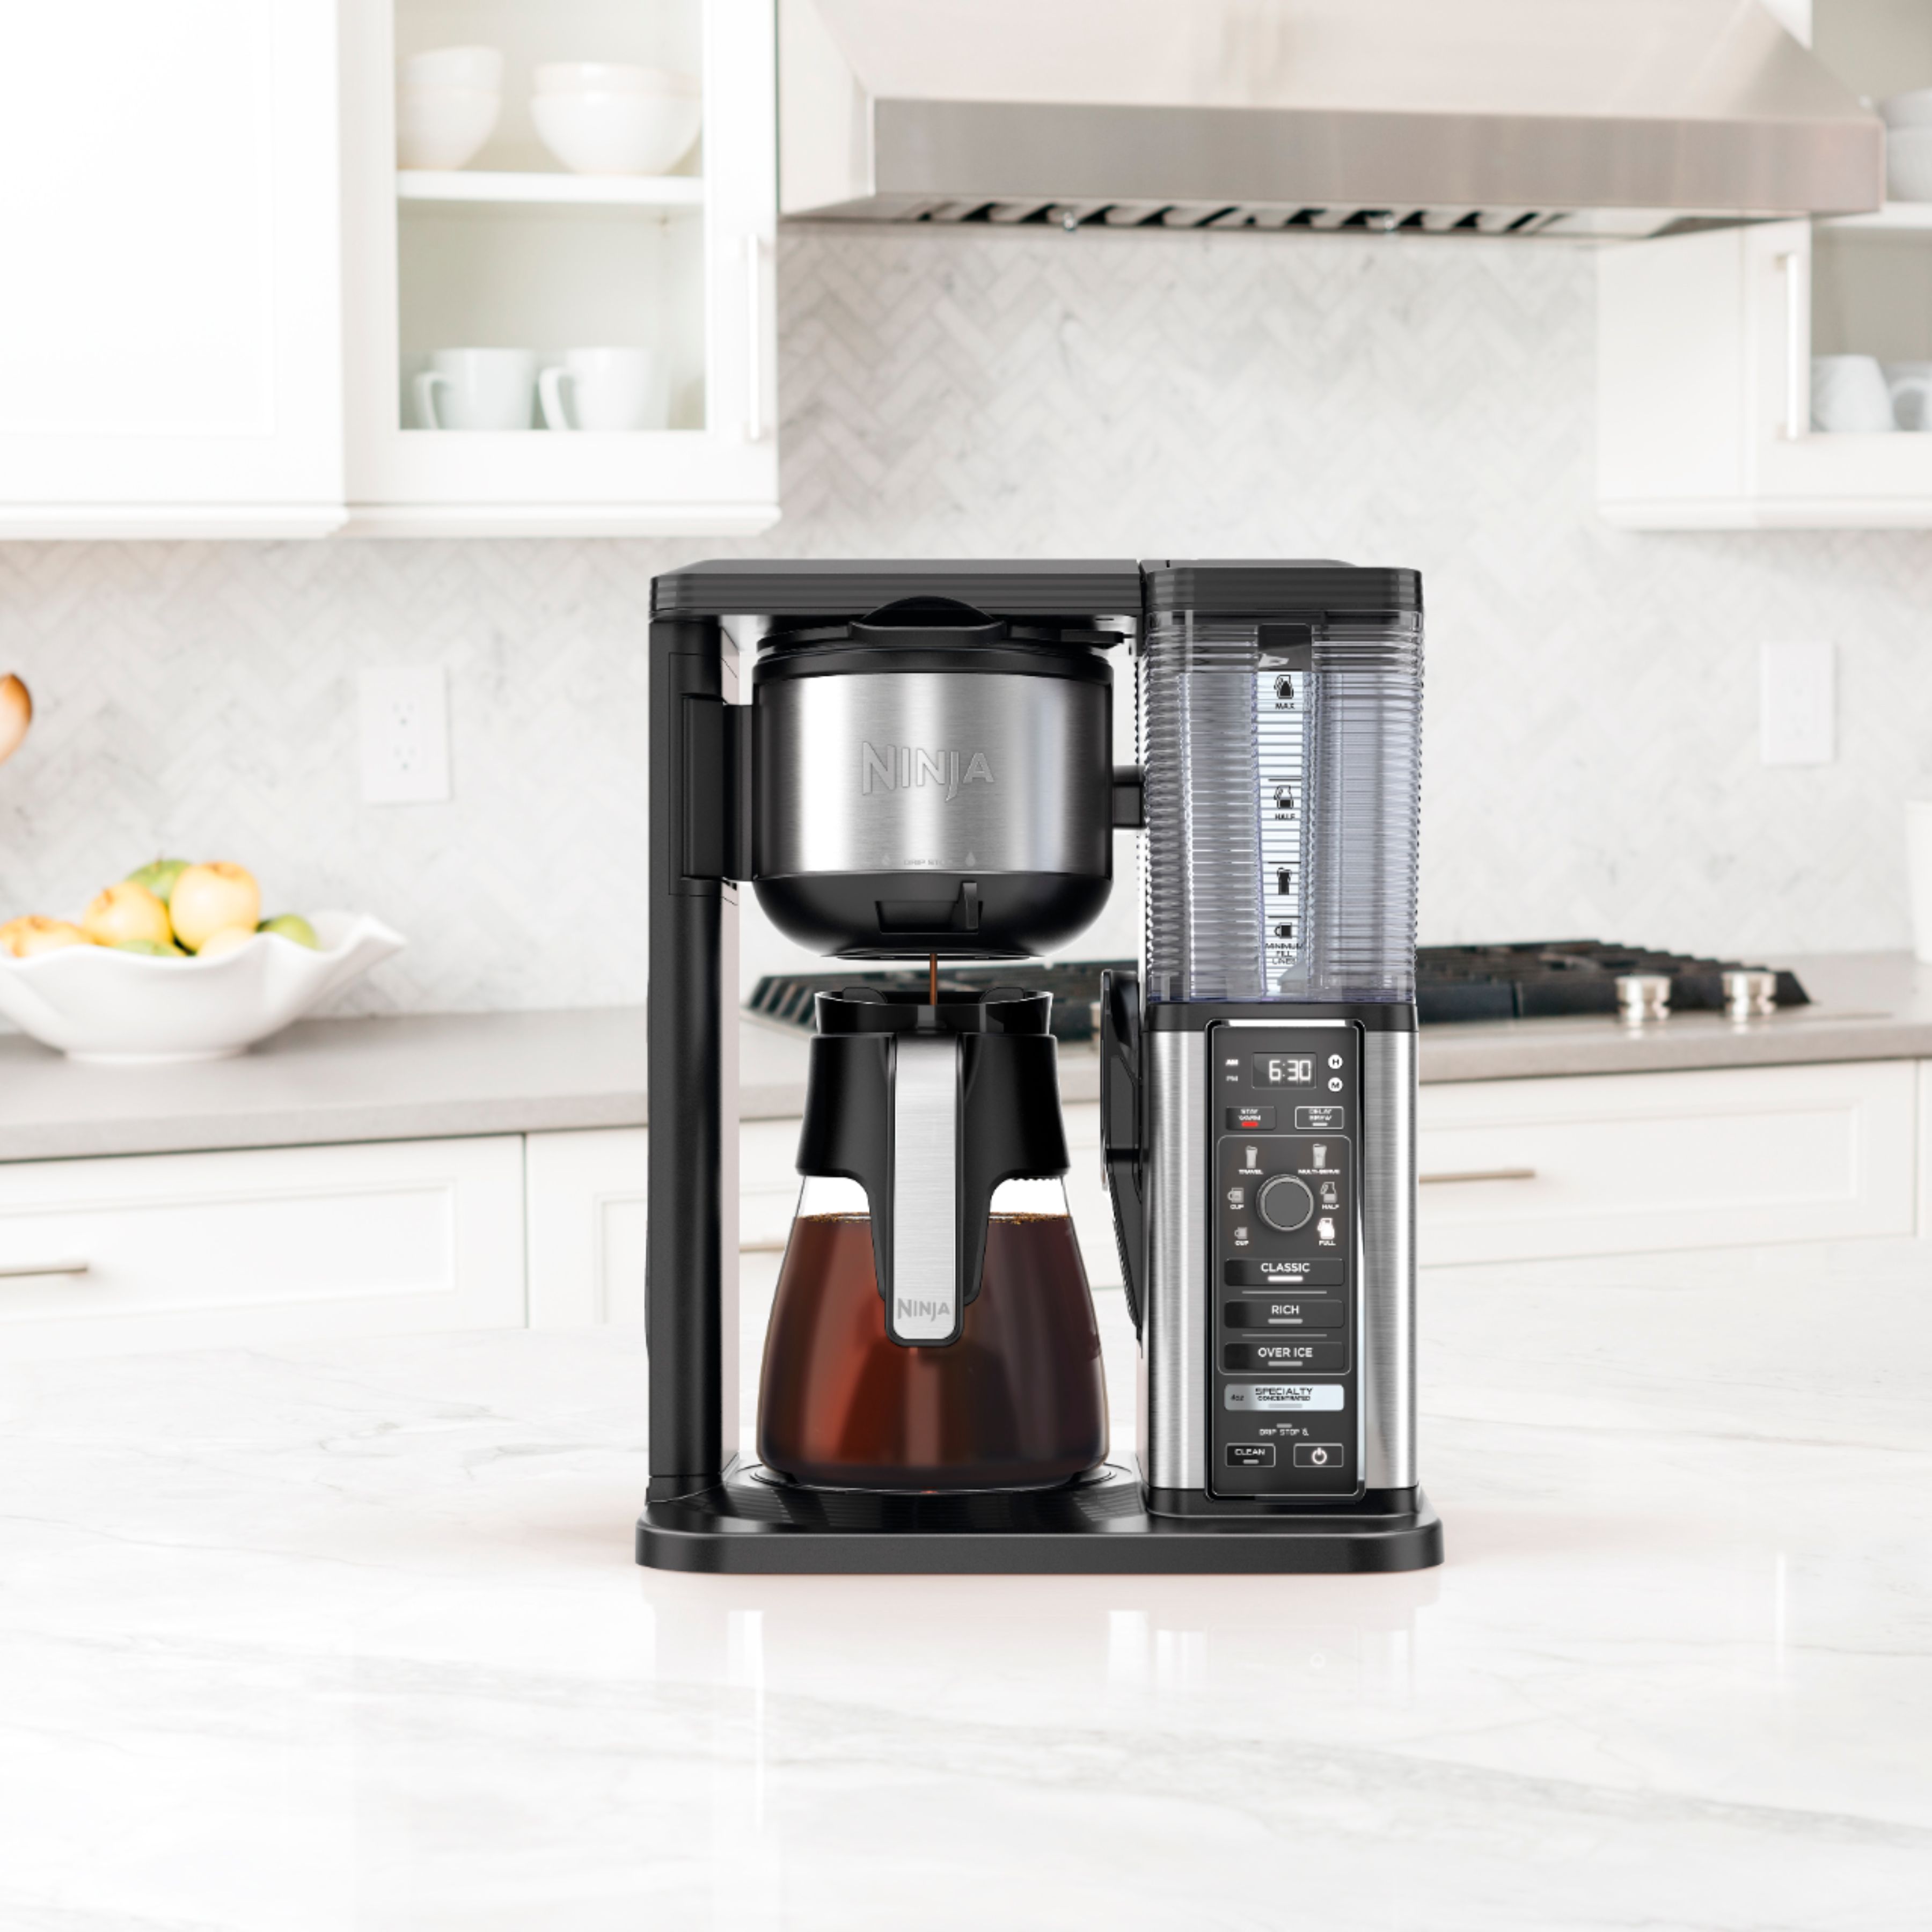 This Ninja specialty coffee maker has never been cheaper – even on